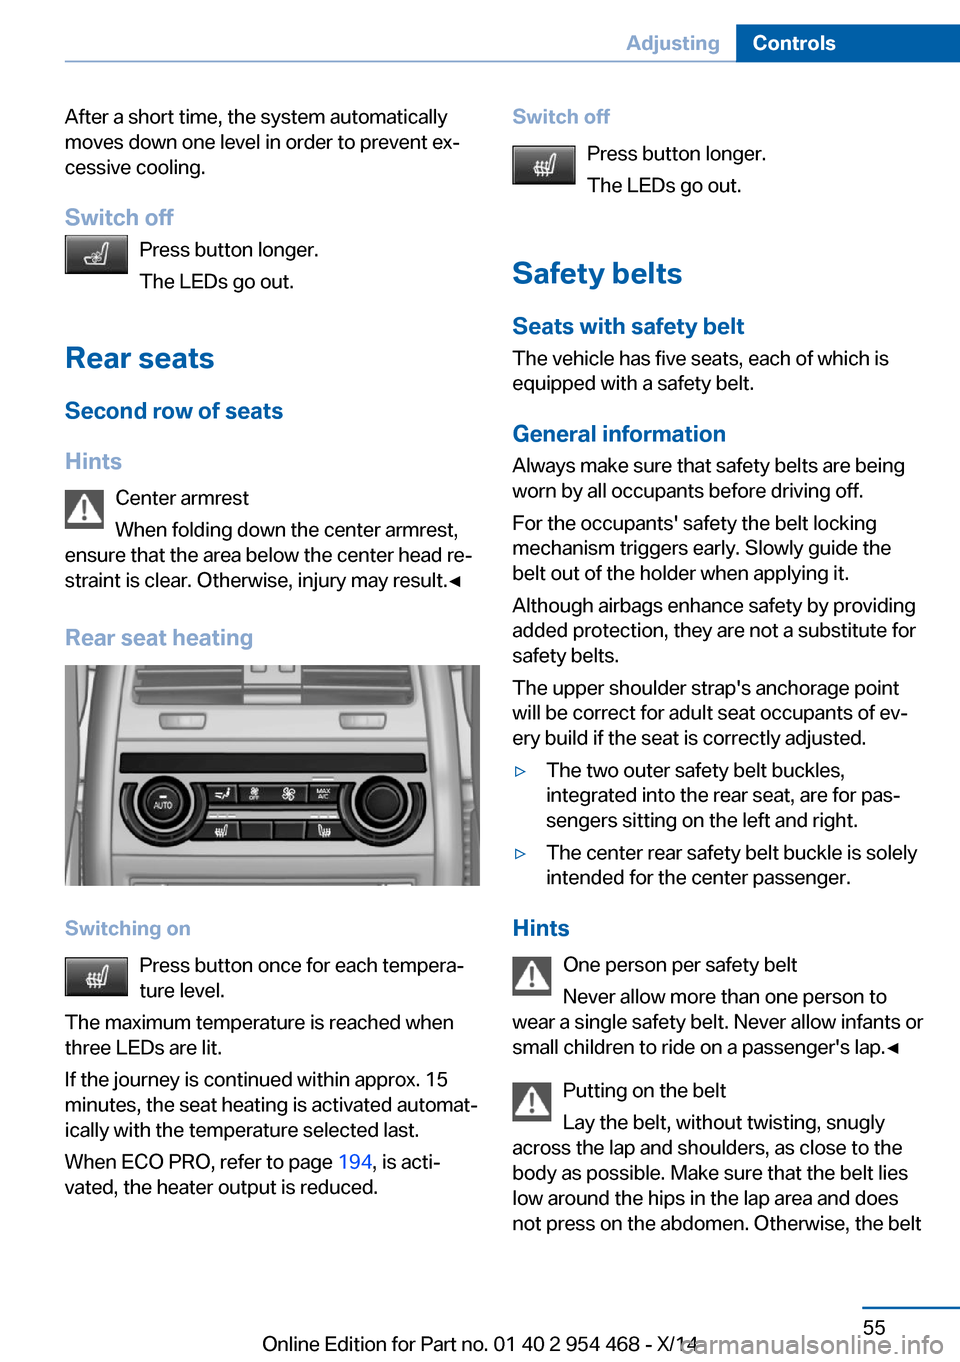 BMW X6 2014 F16 Owners Manual After a short time, the system automatically
moves down one level in order to prevent ex‐
cessive cooling.
Switch off Press button longer.
The LEDs go out.
Rear seats Second row of seats
Hints Cente